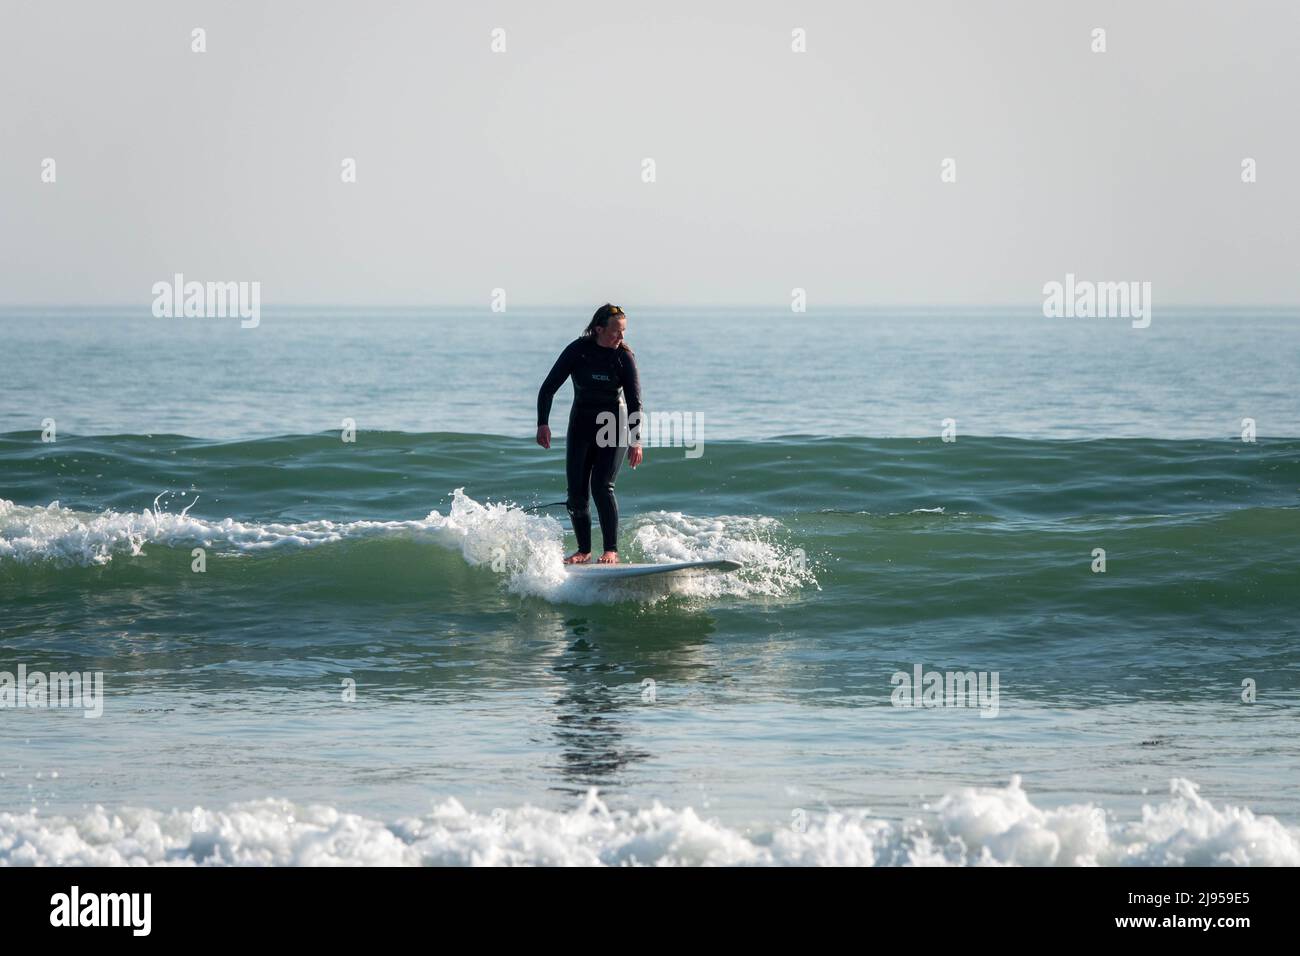 surfer riding the waves surface water sport Stock Photo